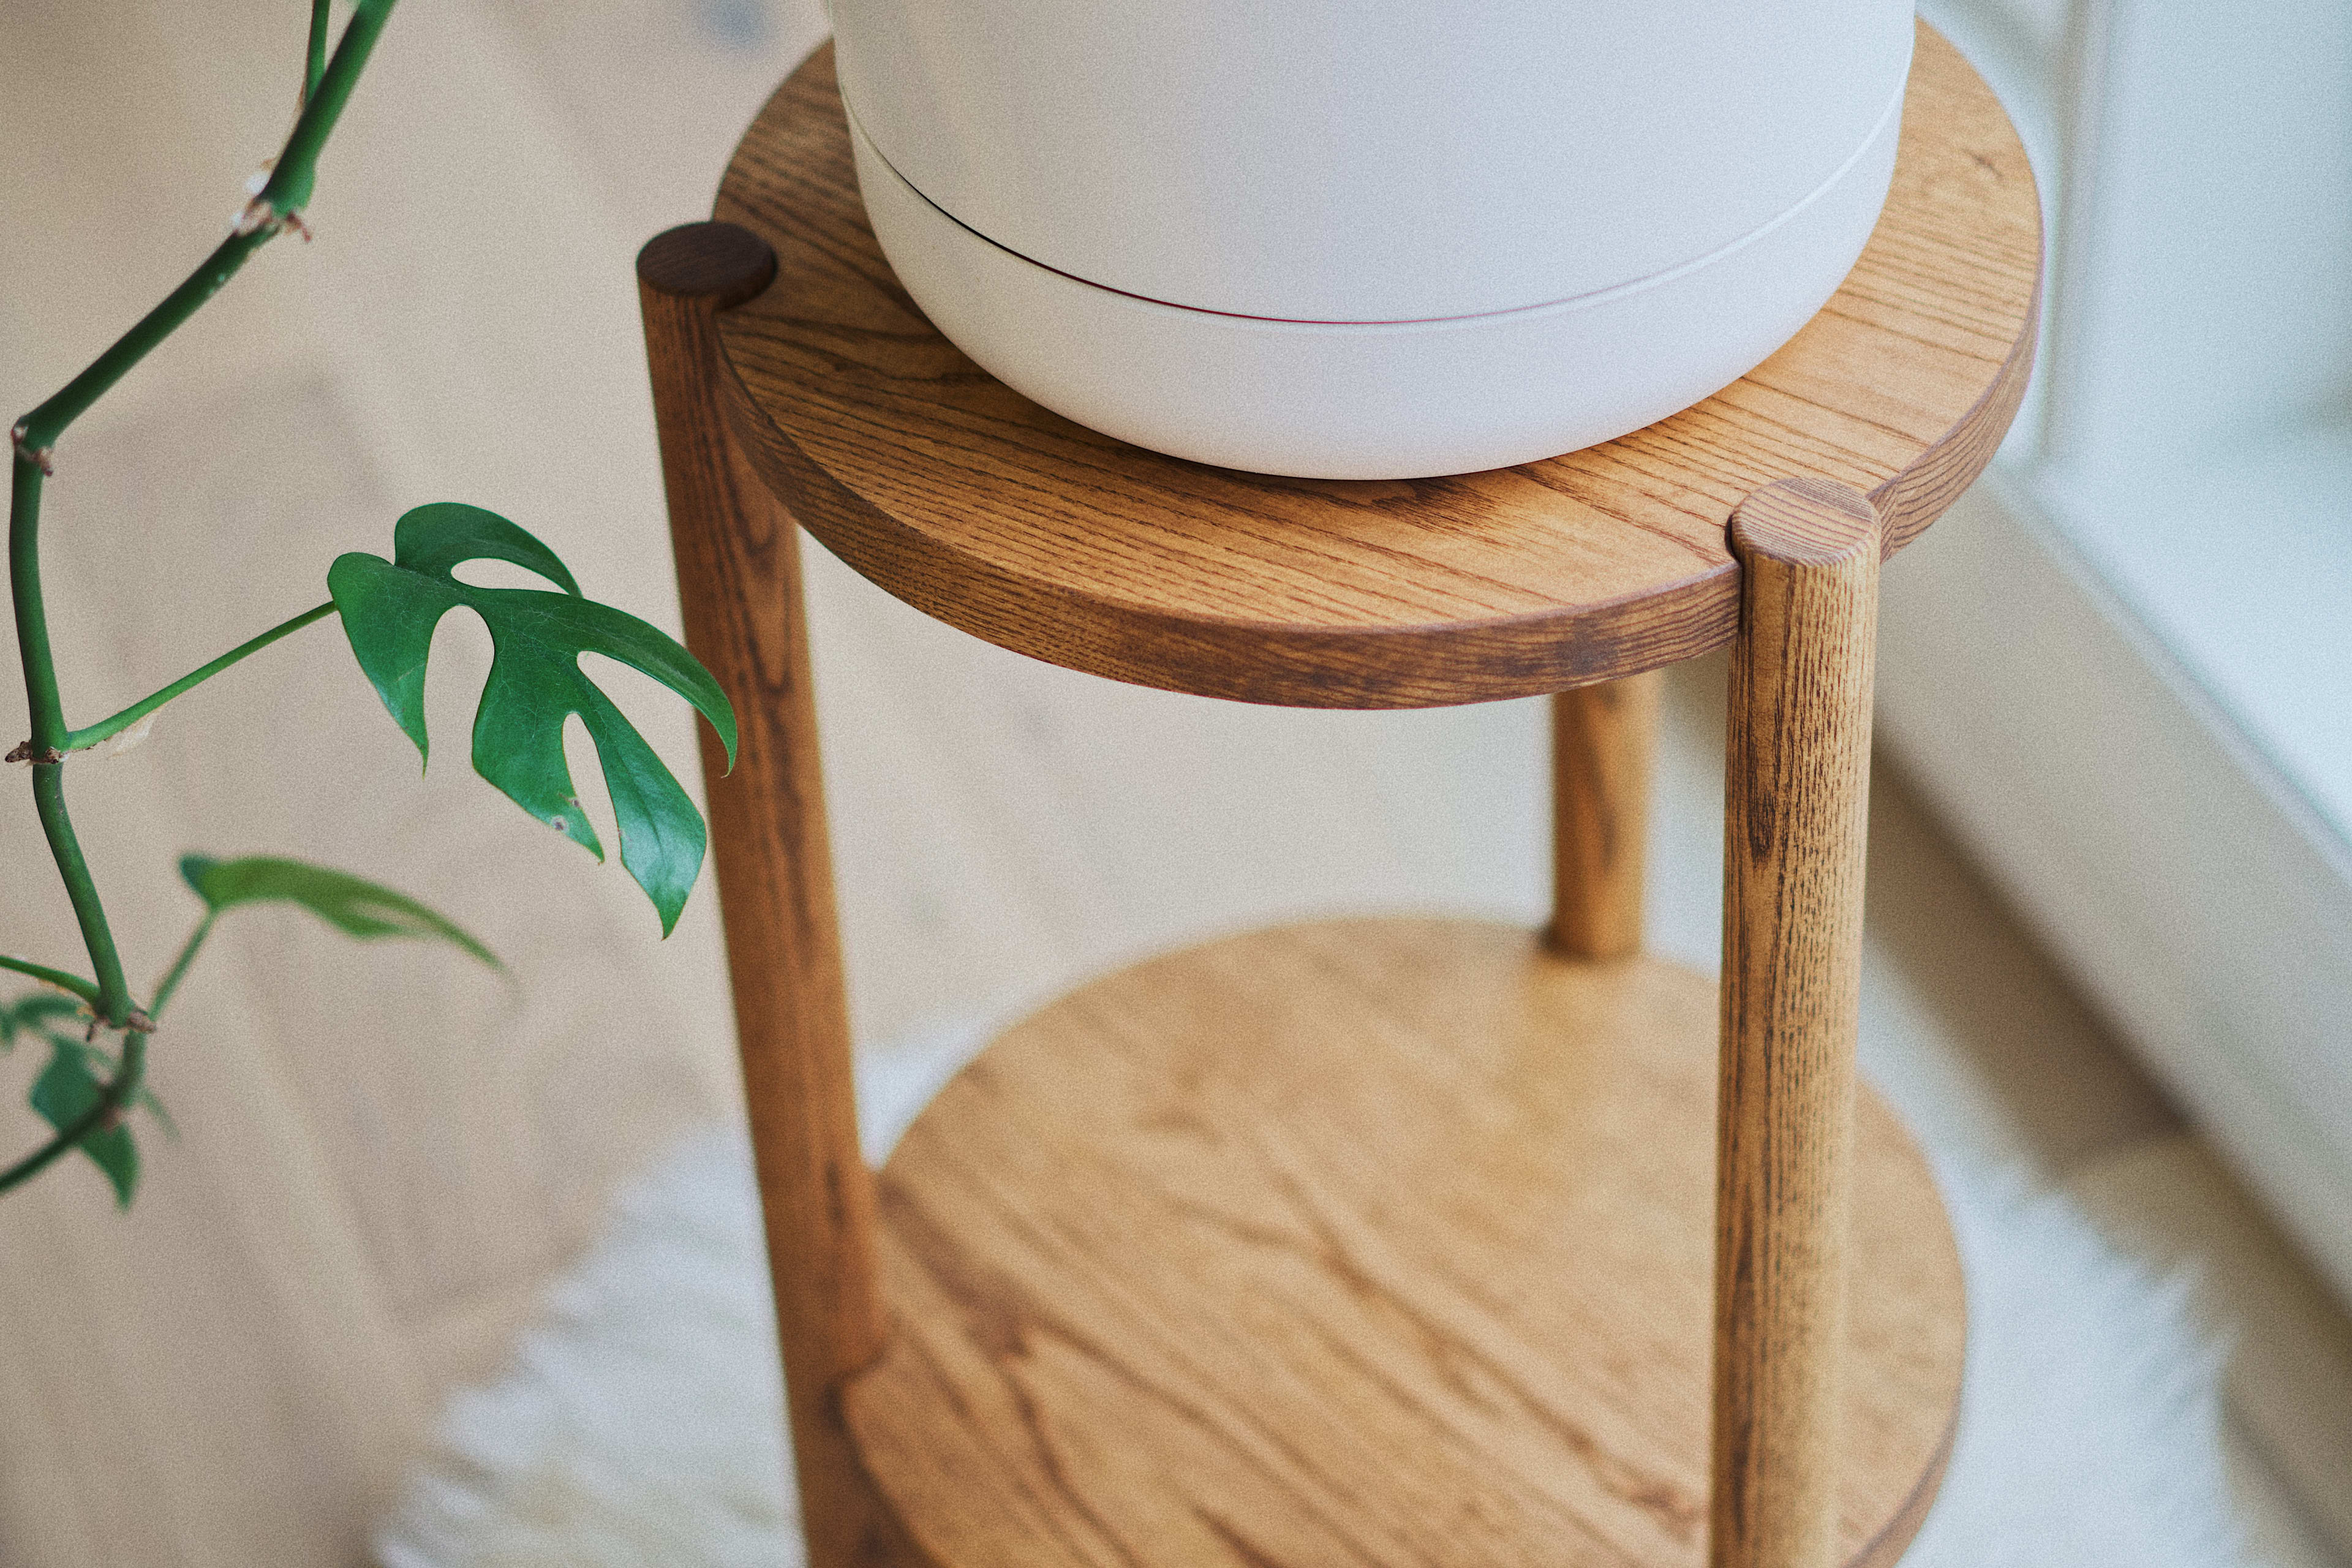 A minimal beige potted plant on a wooden stand for a product photo shoot.